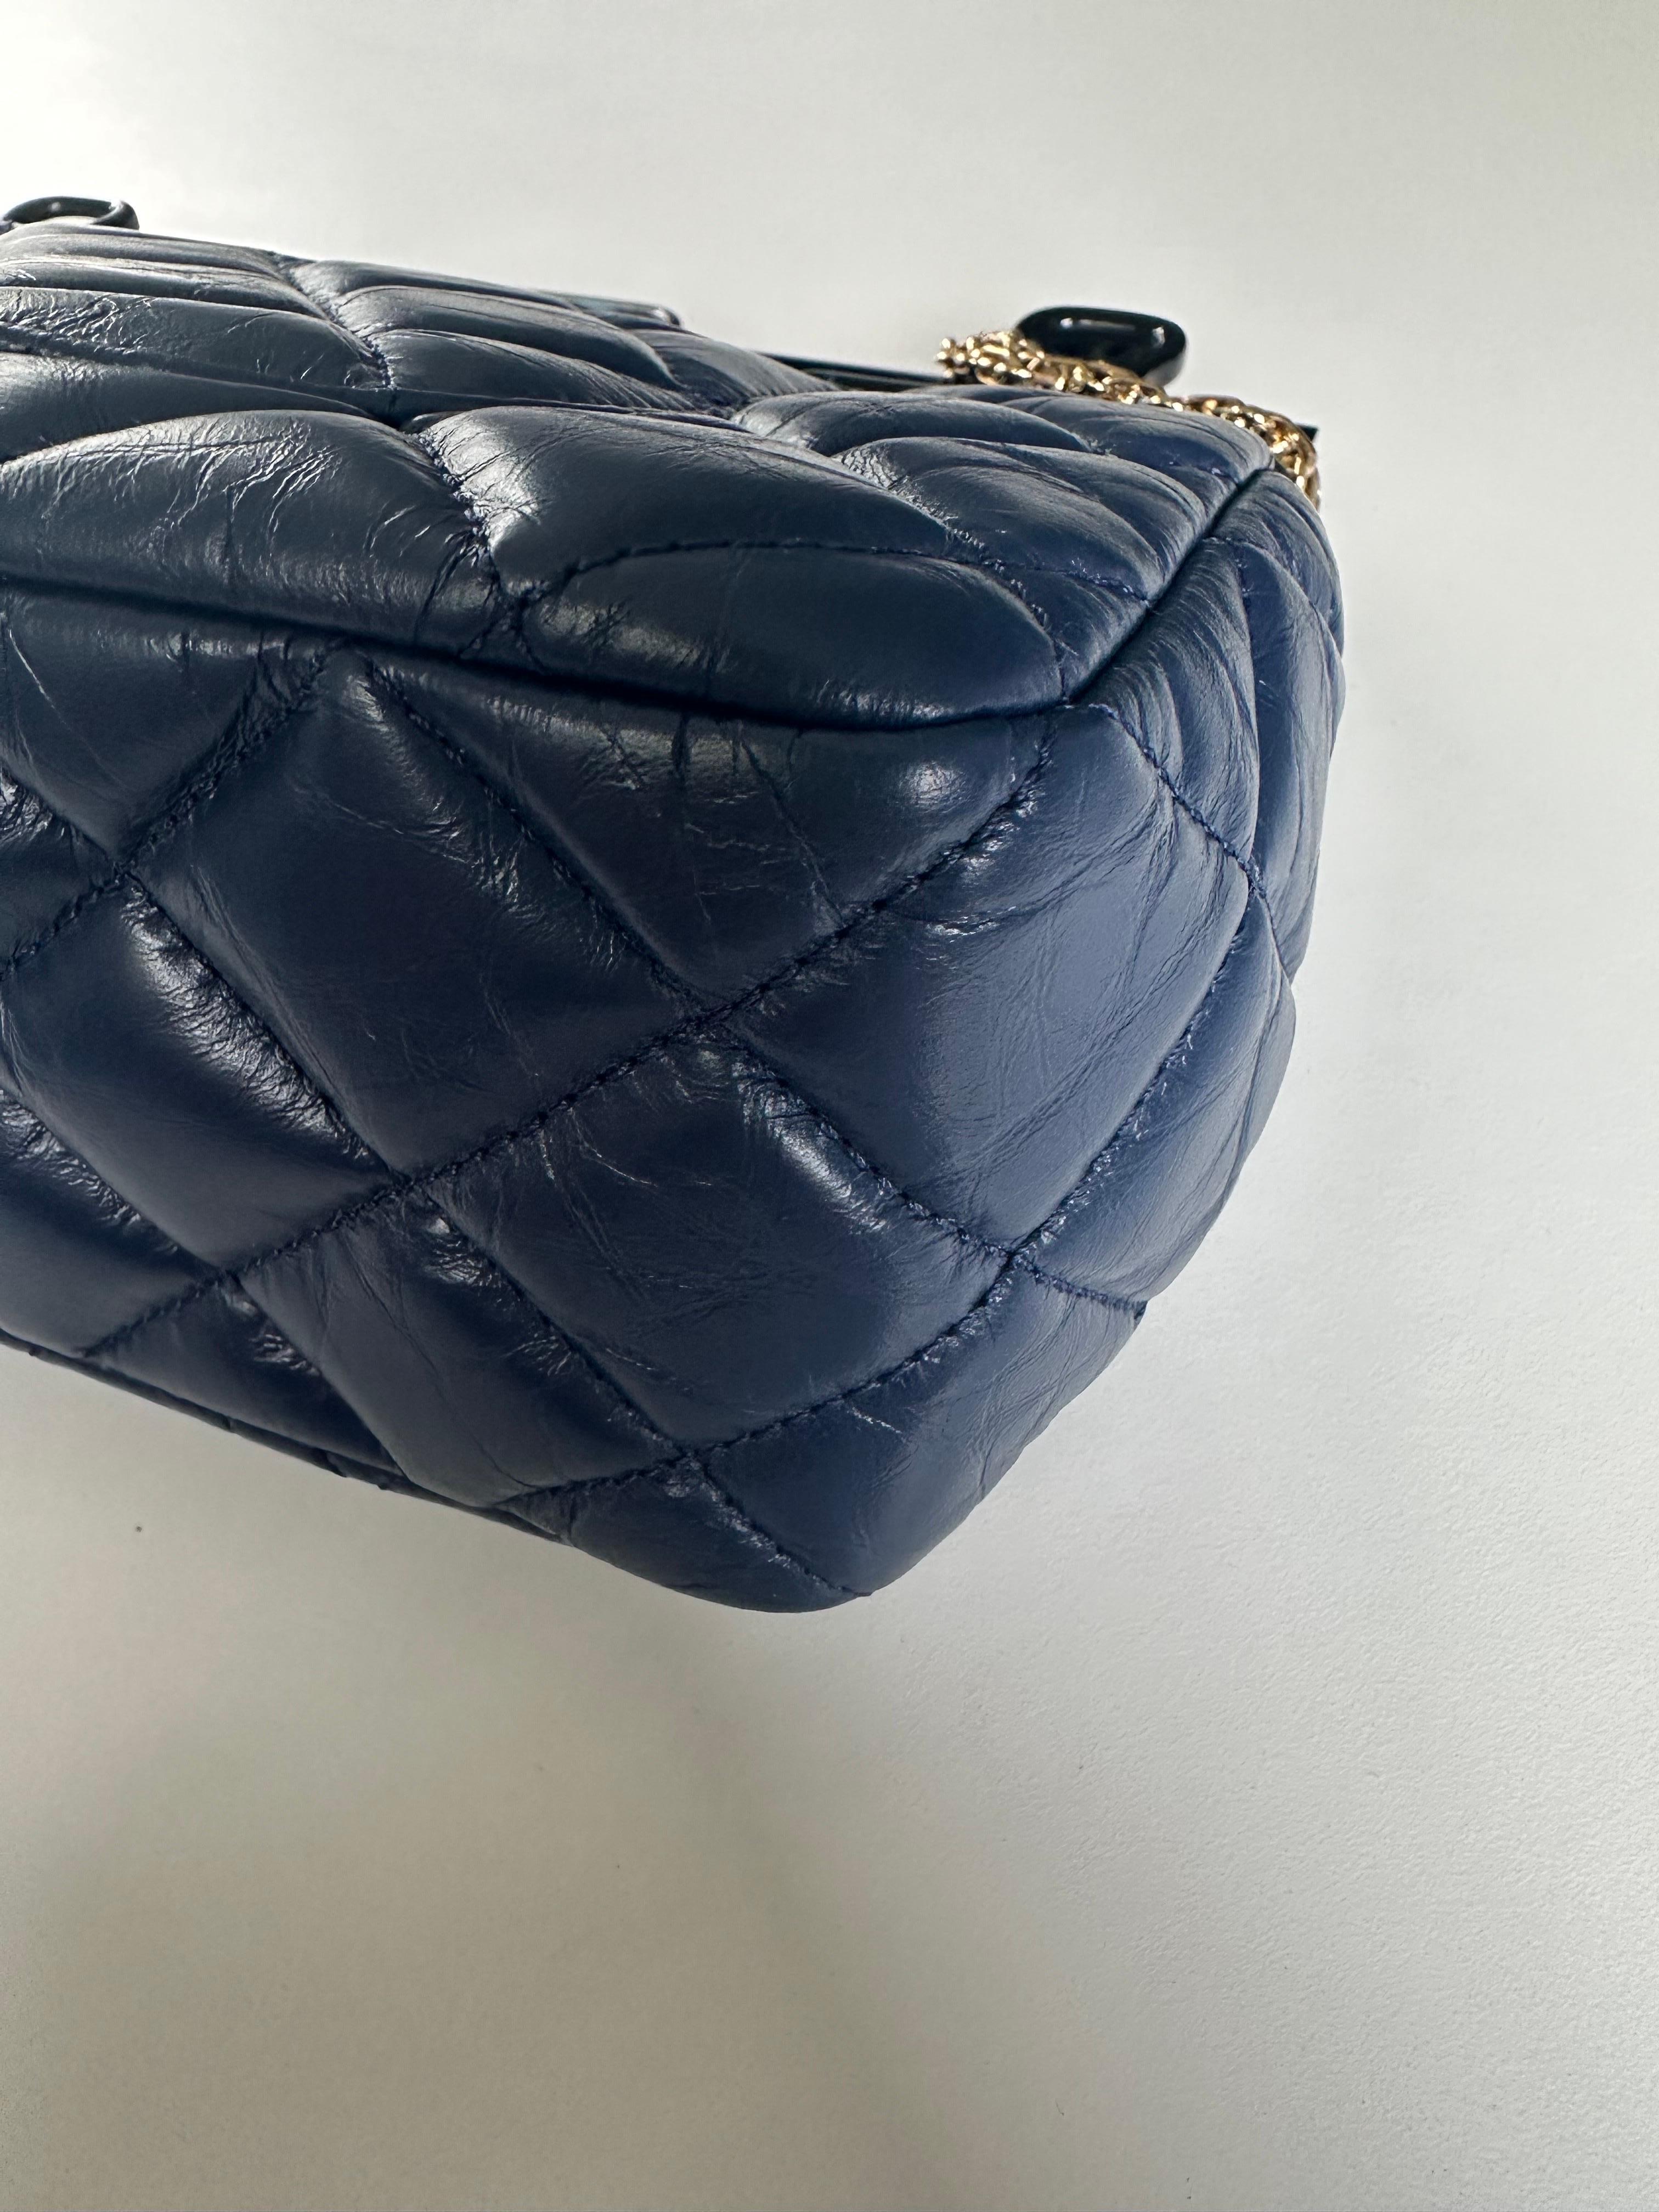 Chanel 2016 Limited Editiion 2.55 Reissue Rare Hanger Navy Blue Classic Flap Bag For Sale 4